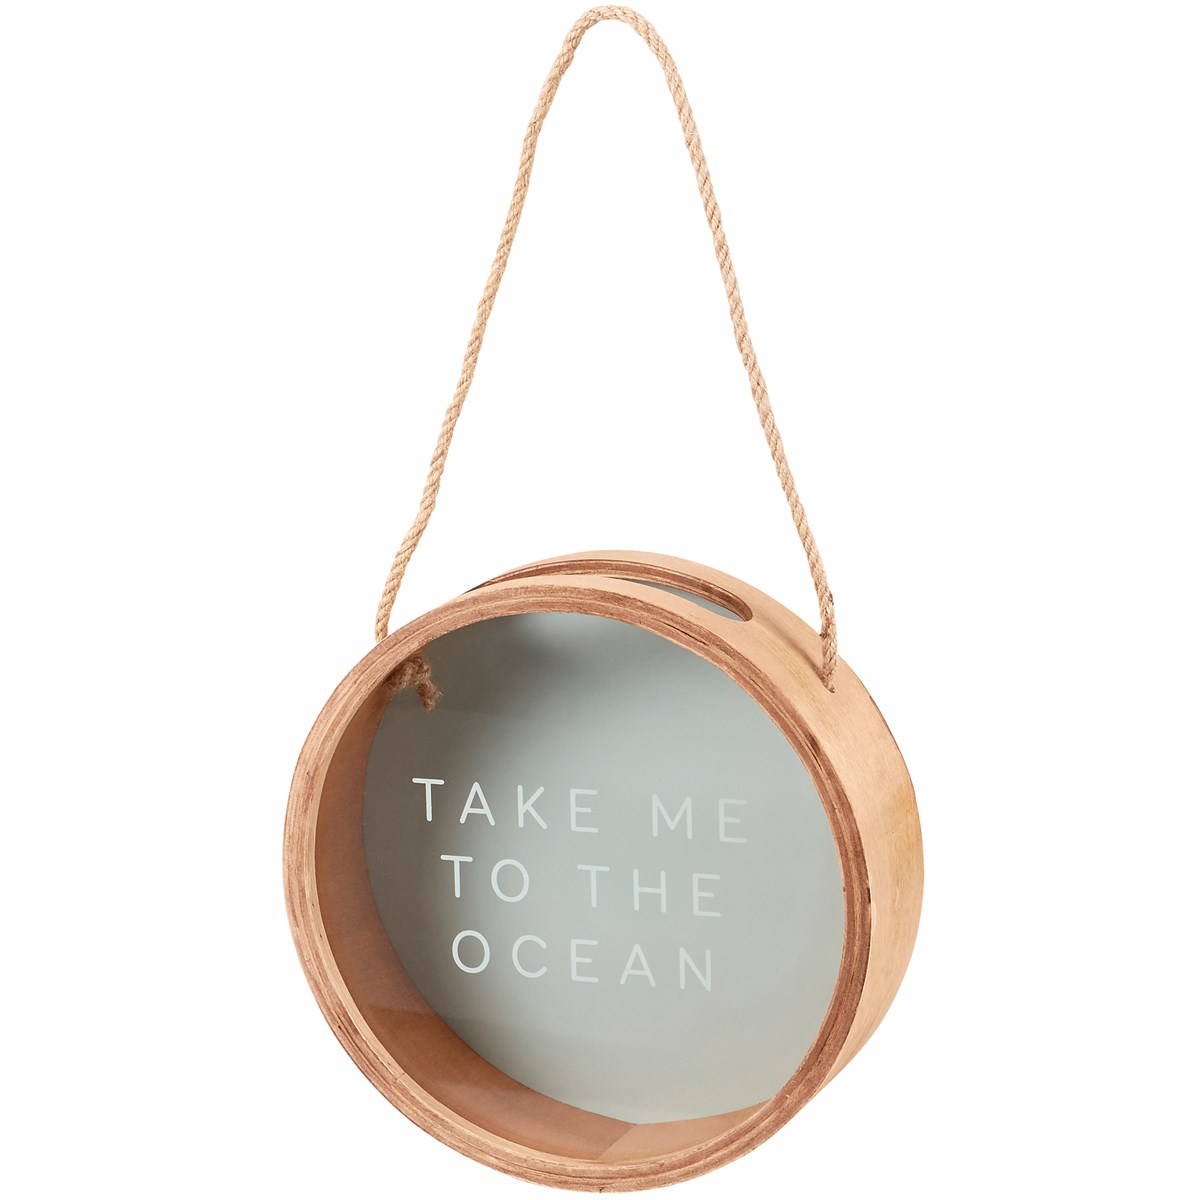 Take Me To The Ocean Shell Holder - Wood, Glass, Rope